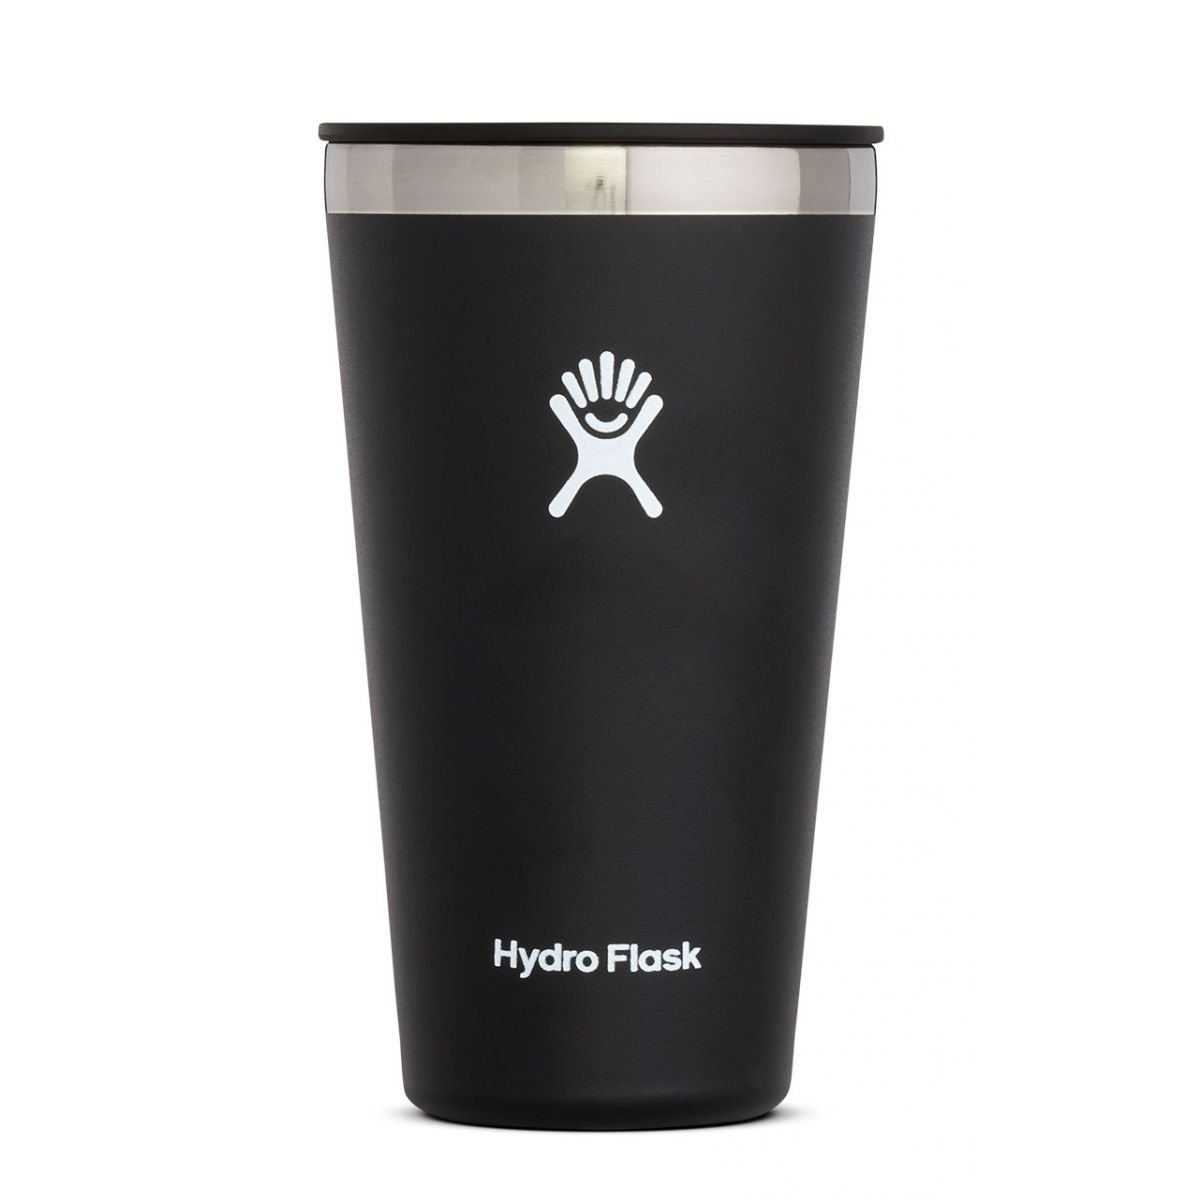 hydro-flask-stainless-steel-vacuum-insulated-16-oz-tumbler-black_1